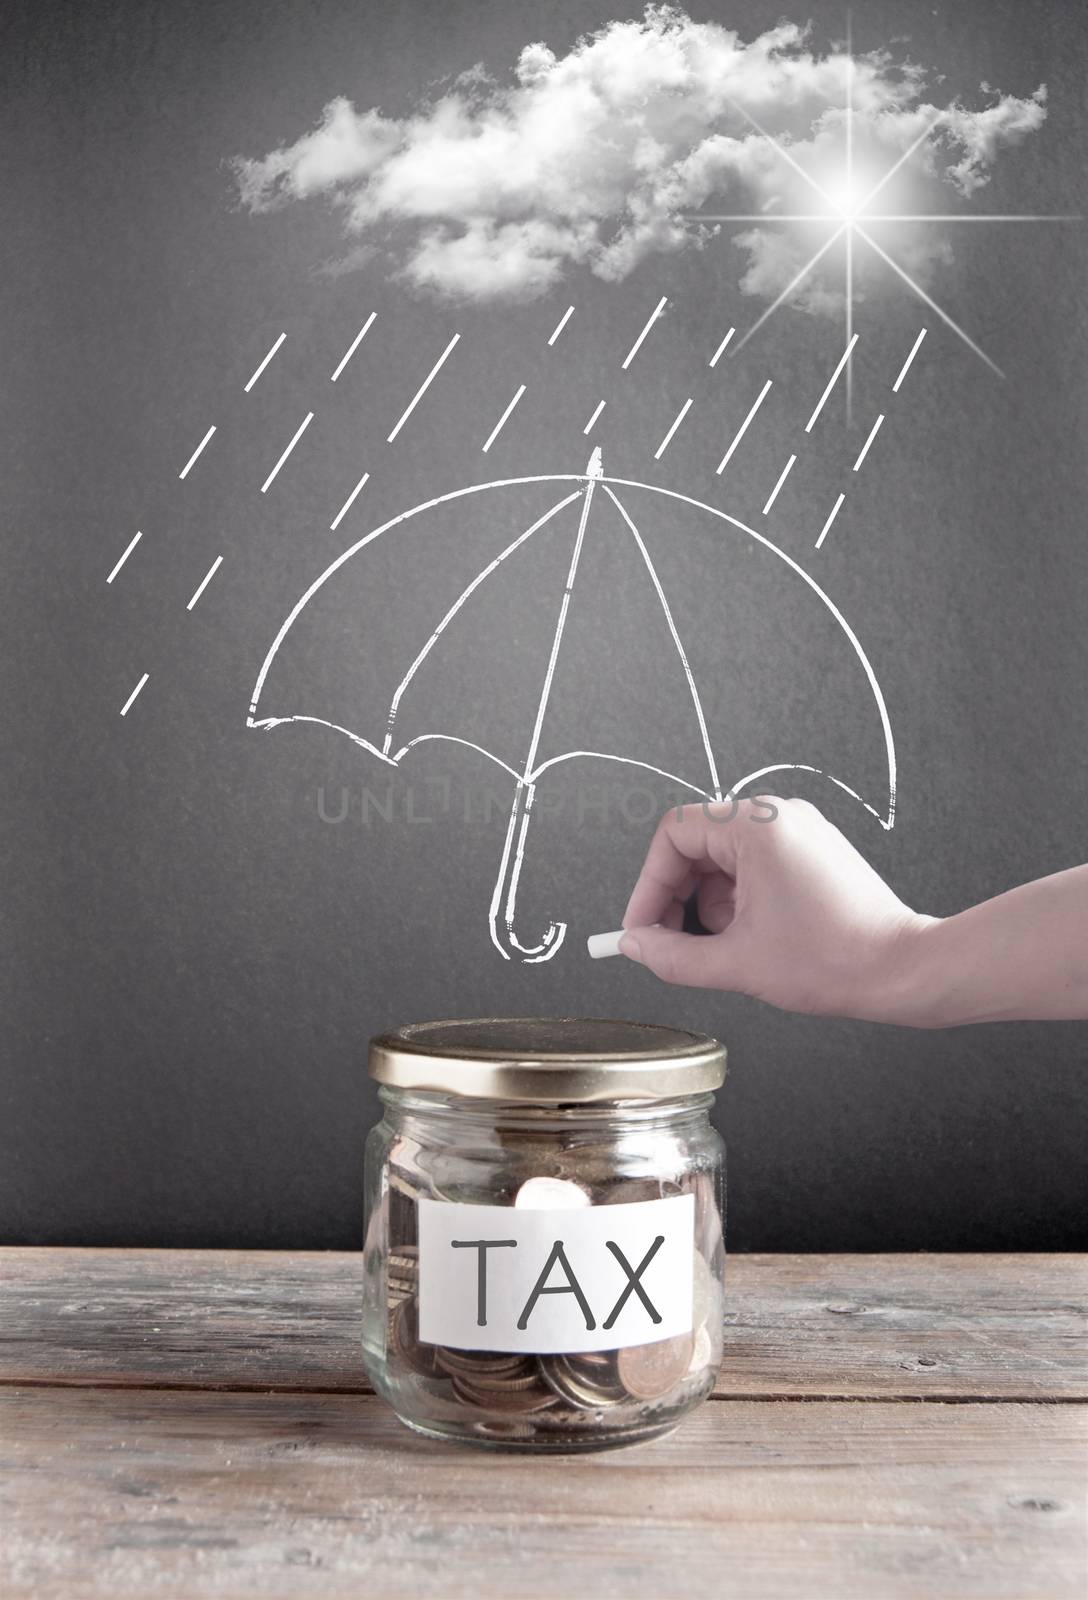 Tax protection by unikpix